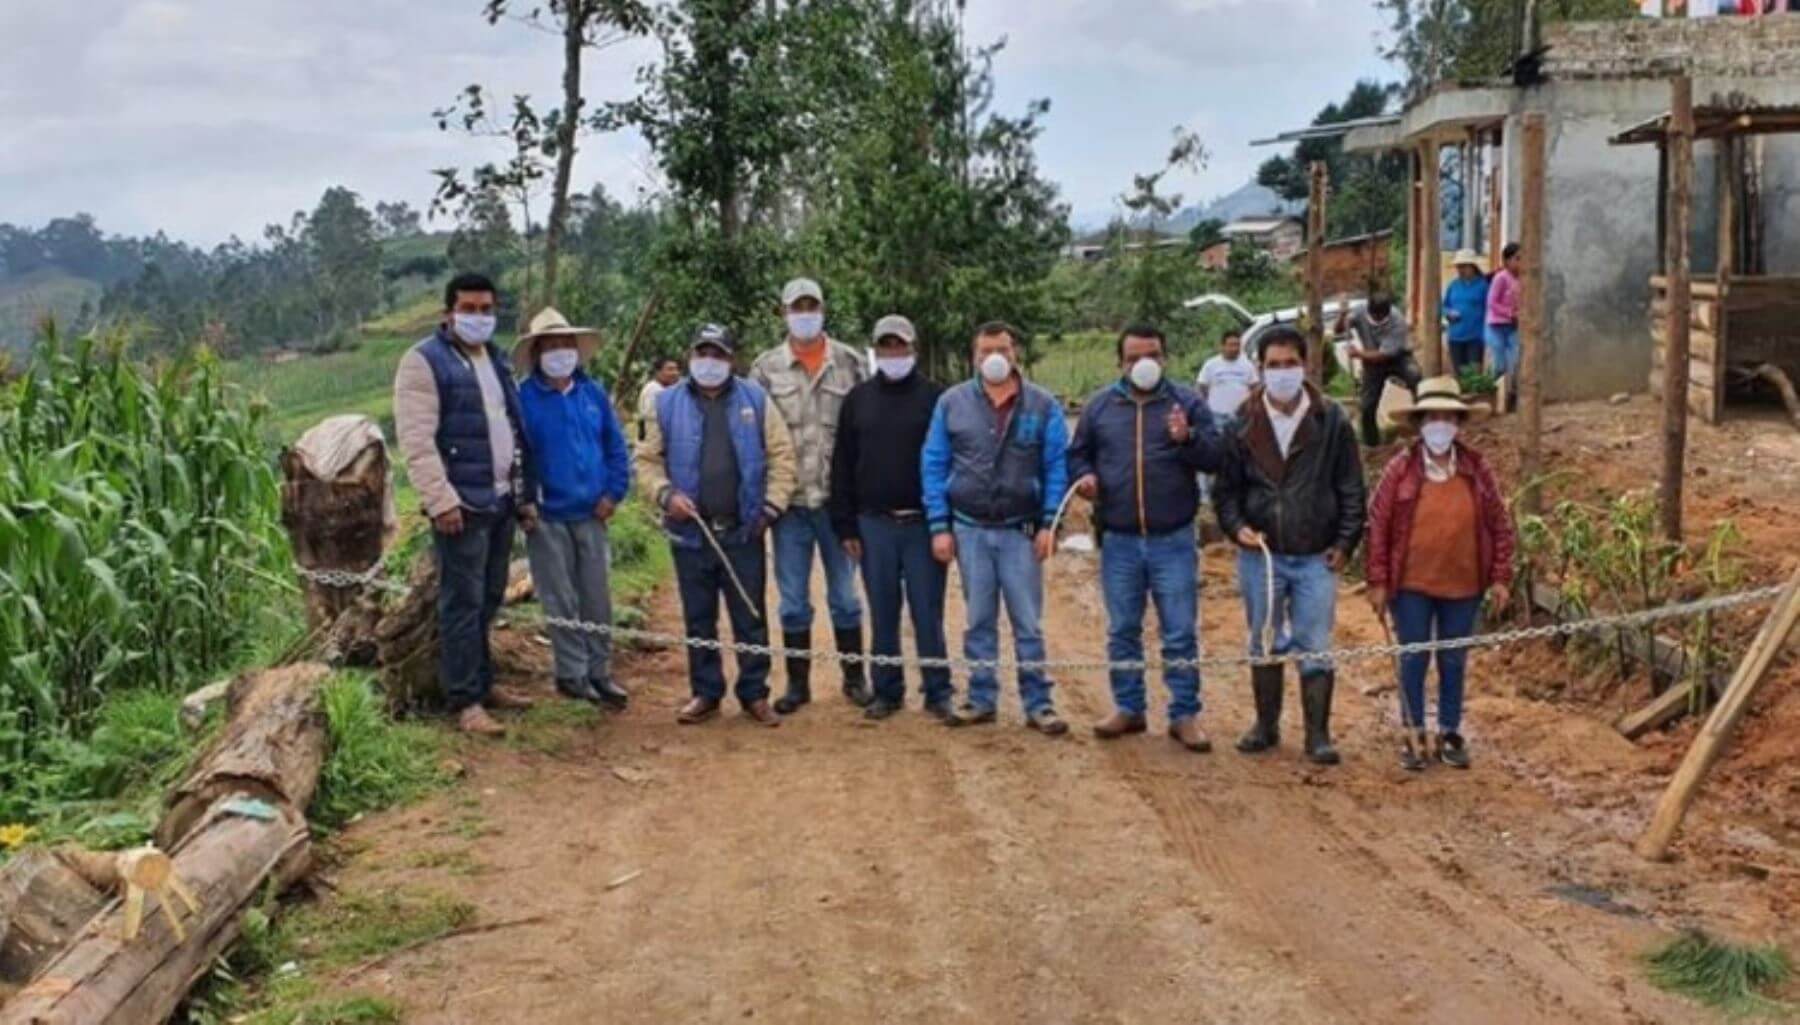 Journalists detained by rural self-defense group in Peru